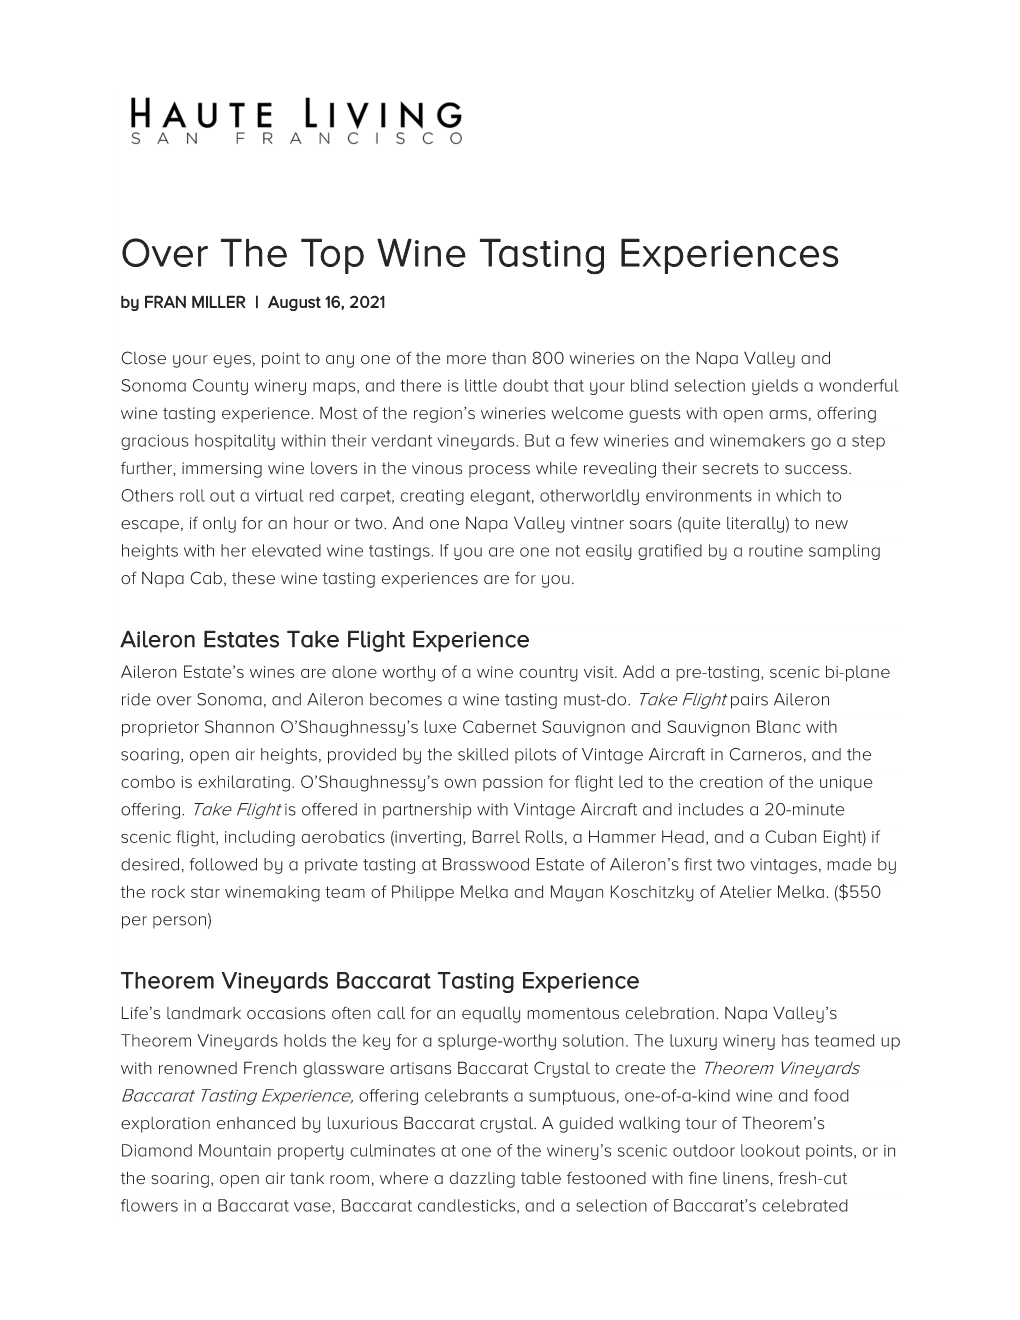 Over the Top Wine Tasting Experiences by FRAN MILLER | August 16, 2021